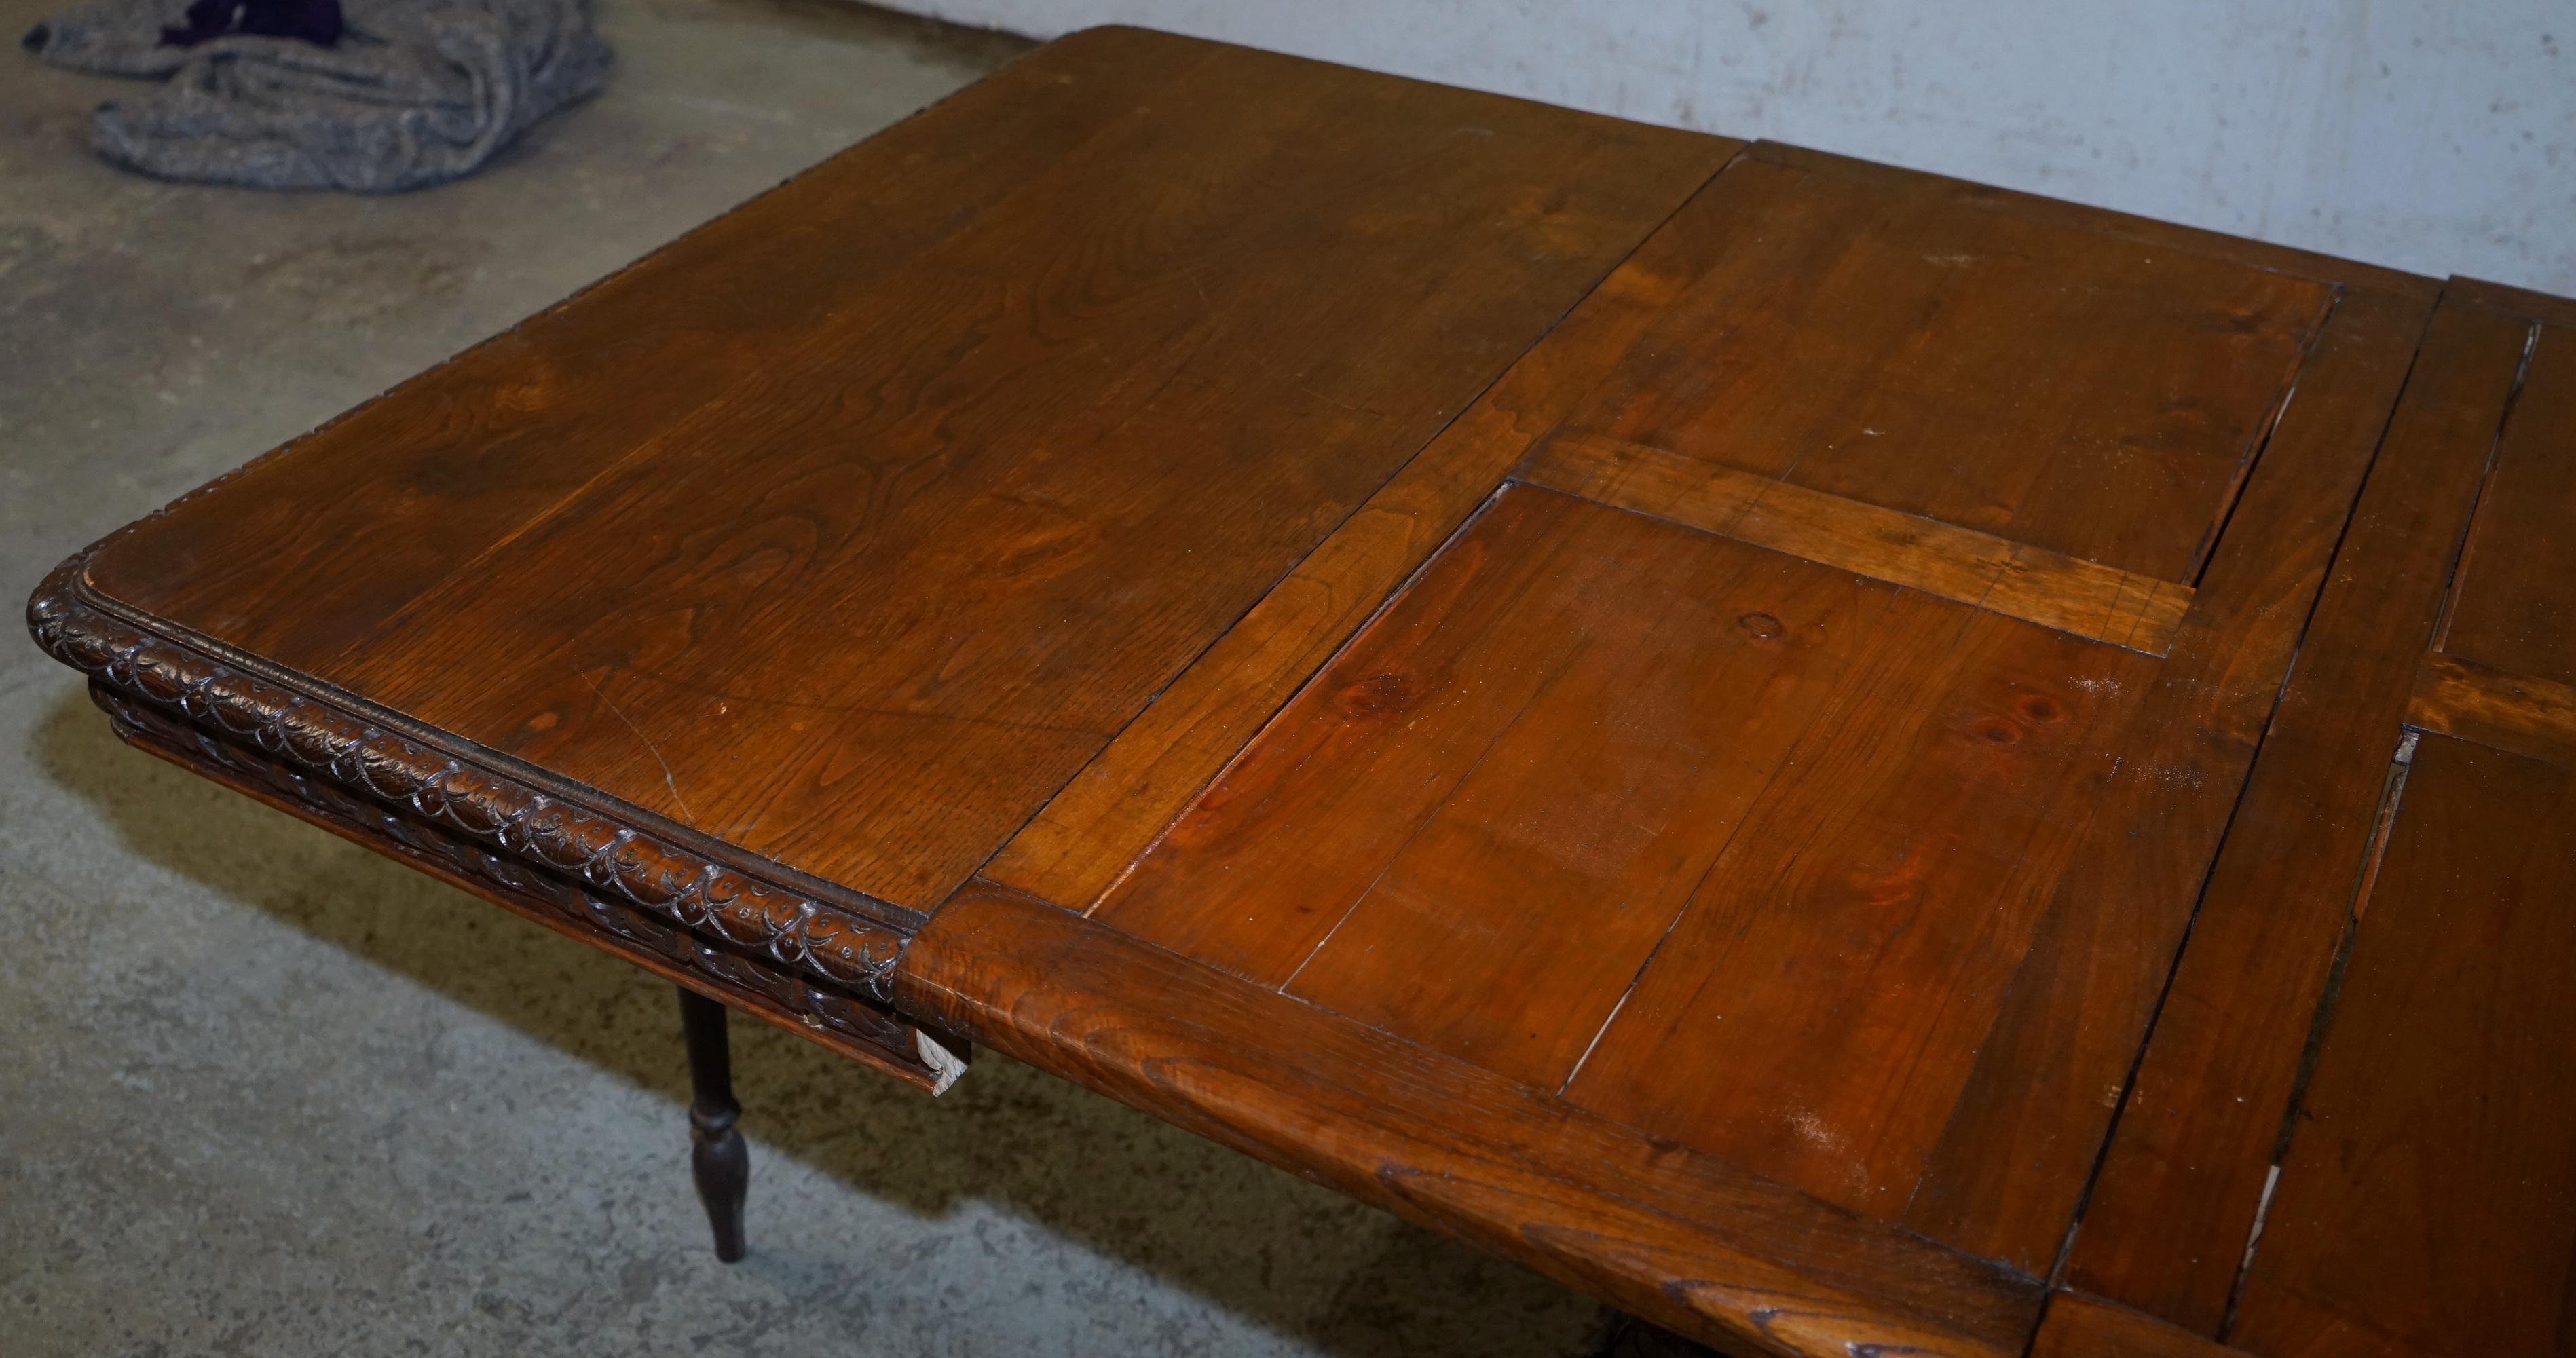 Rare circa 1880 French Brittany Hand Carved Chestnut Wood Extending Dining Table 13